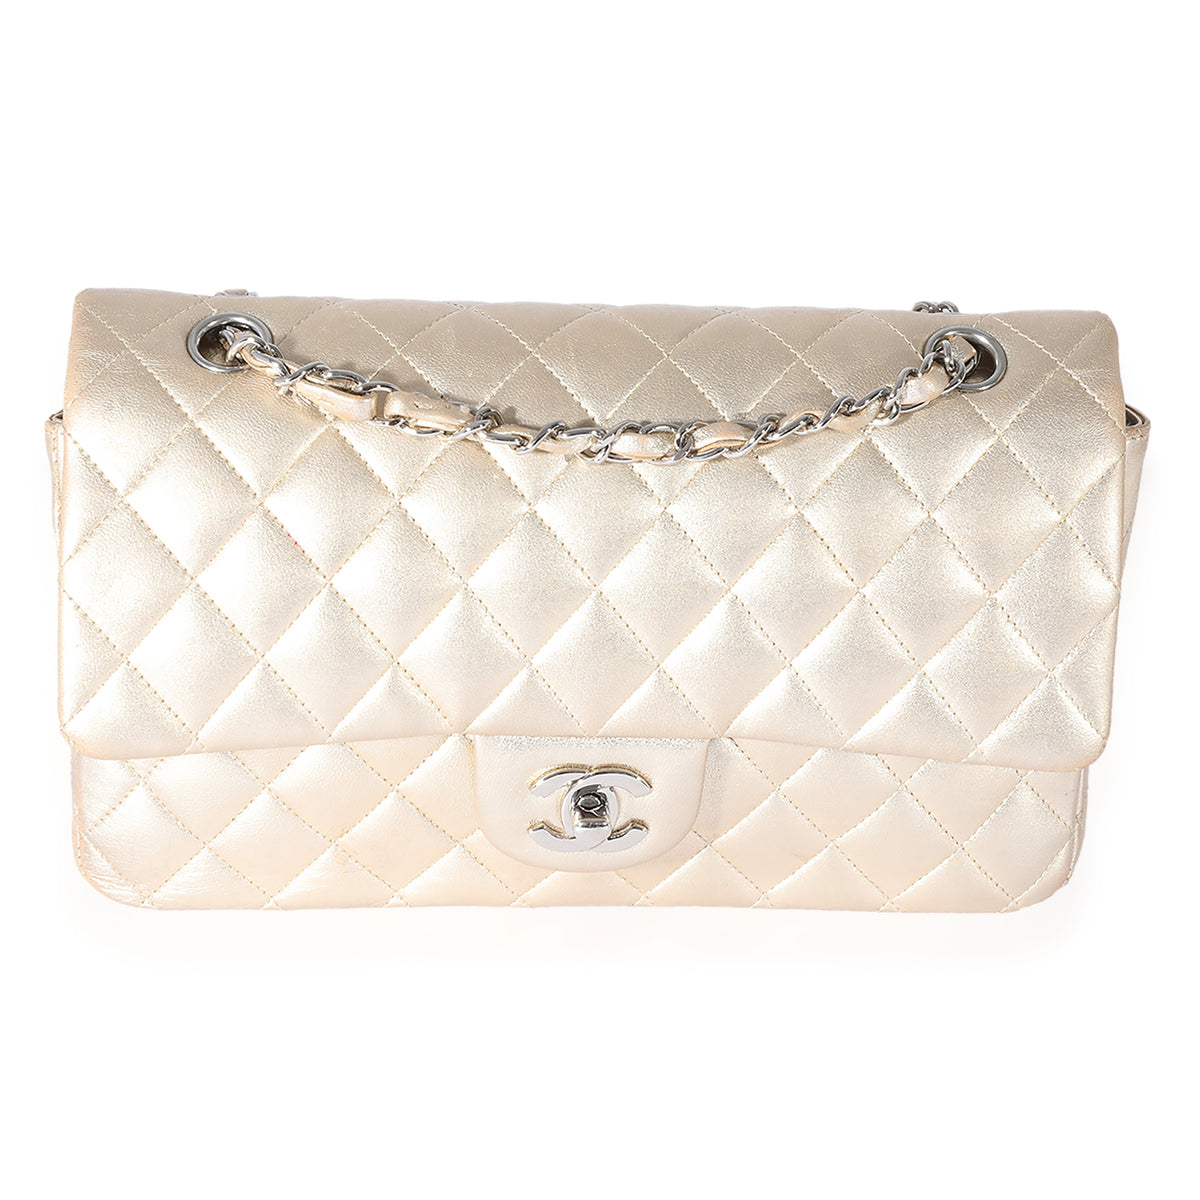 Chanel Metallic Silver Quilted Lambskin Leather Medium Double Flap